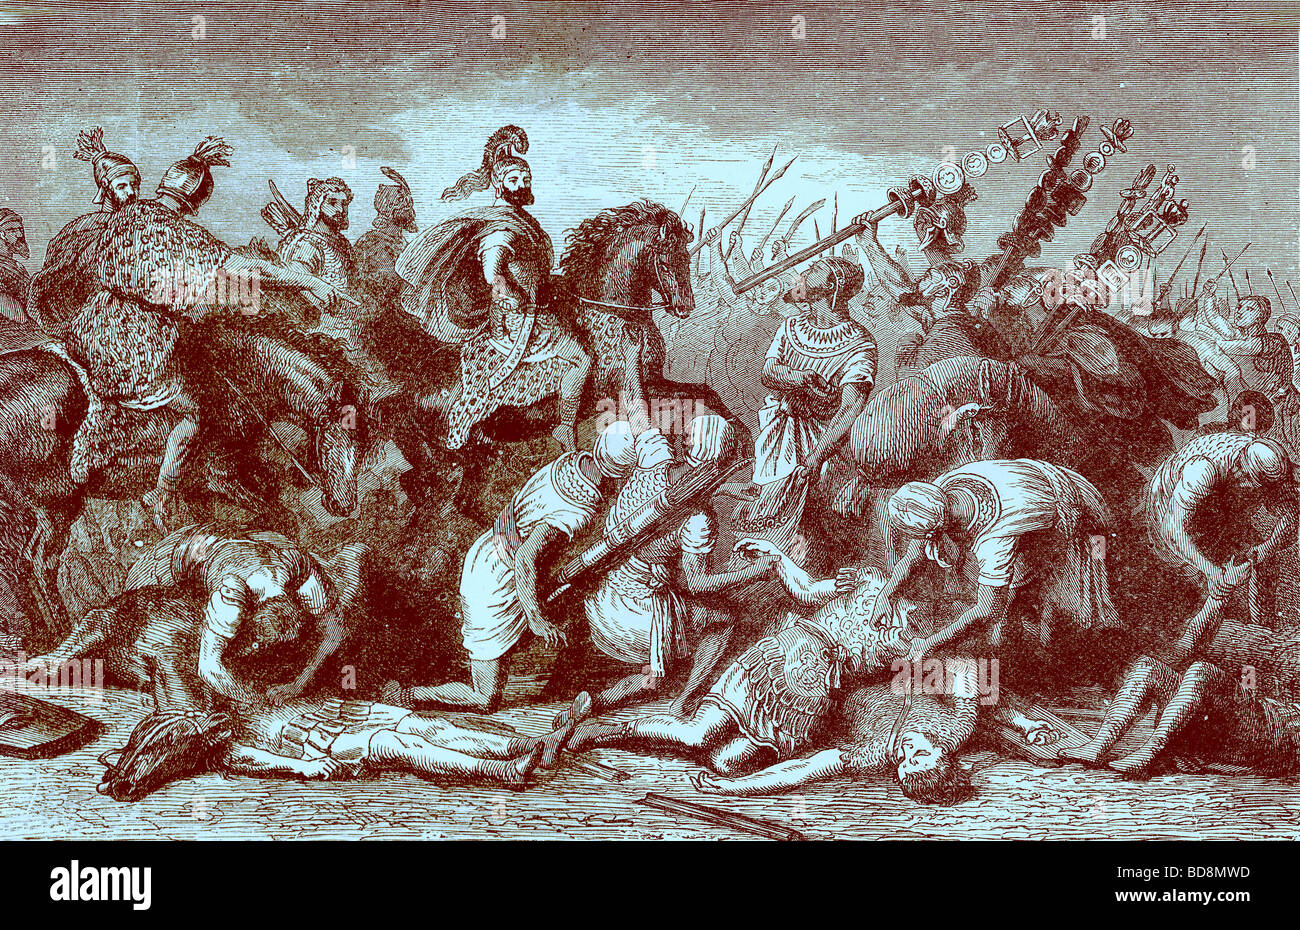 Hannibal s Troops despoiling their dead foes after the Battle of Cannae Illustration from The Illustrated History of the World Stock Photo